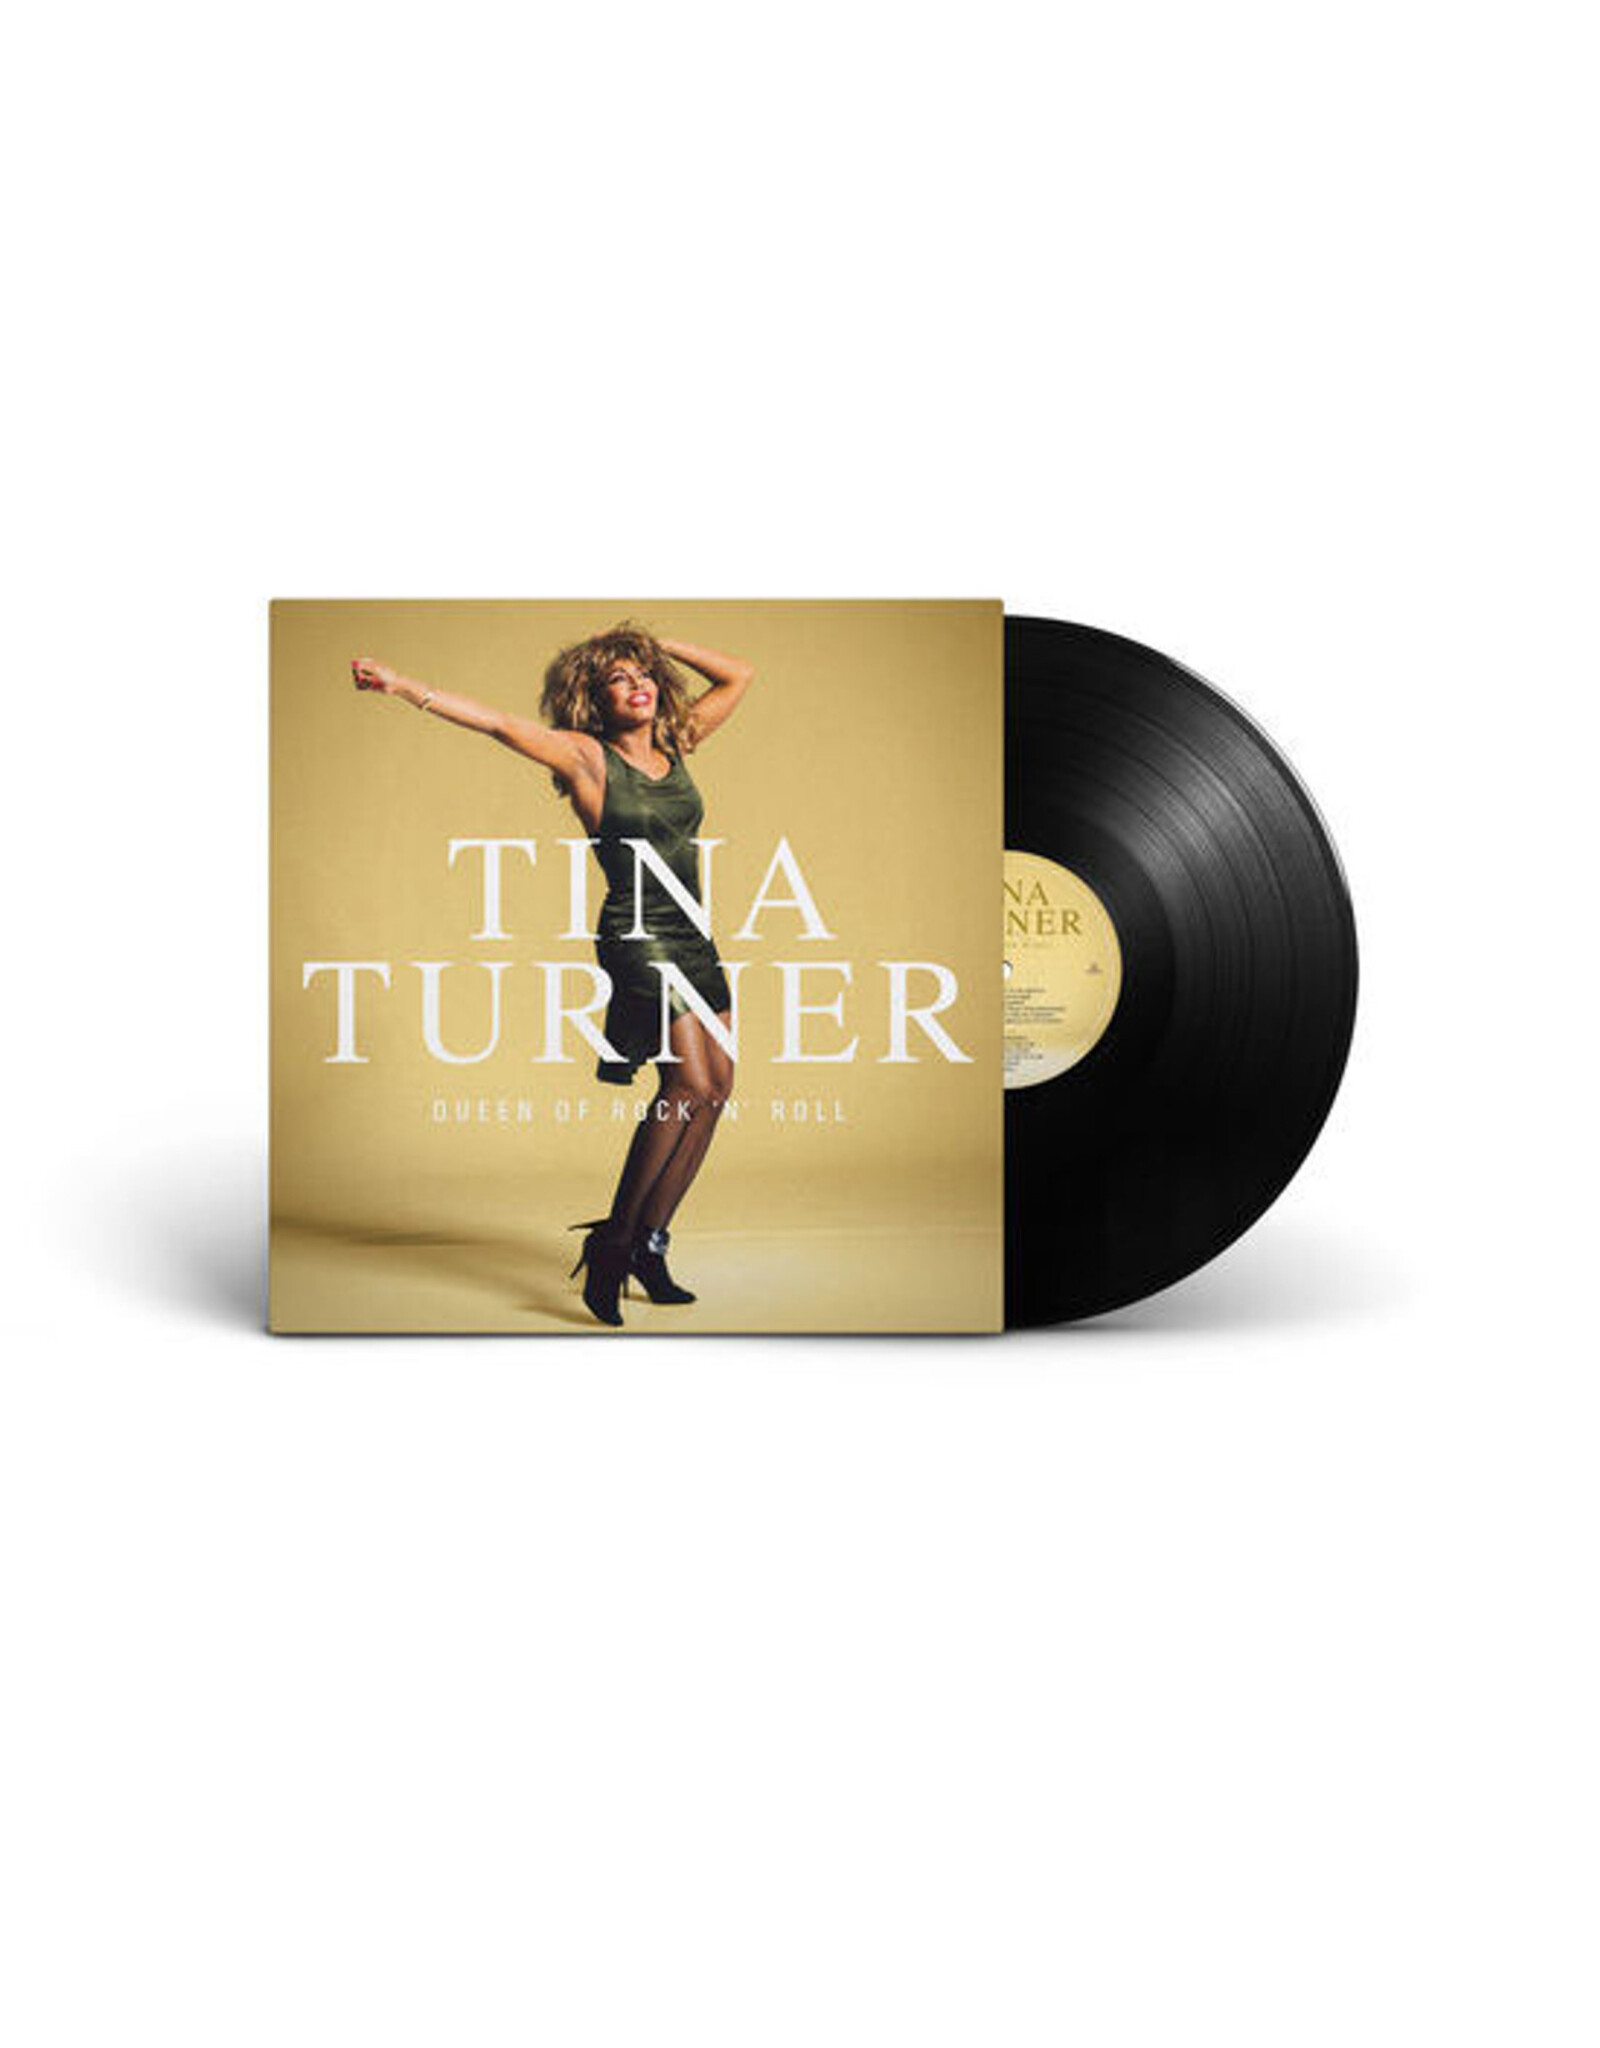 Tina Turner - Queen of Rock 'N' Roll  (Greatest Hits)